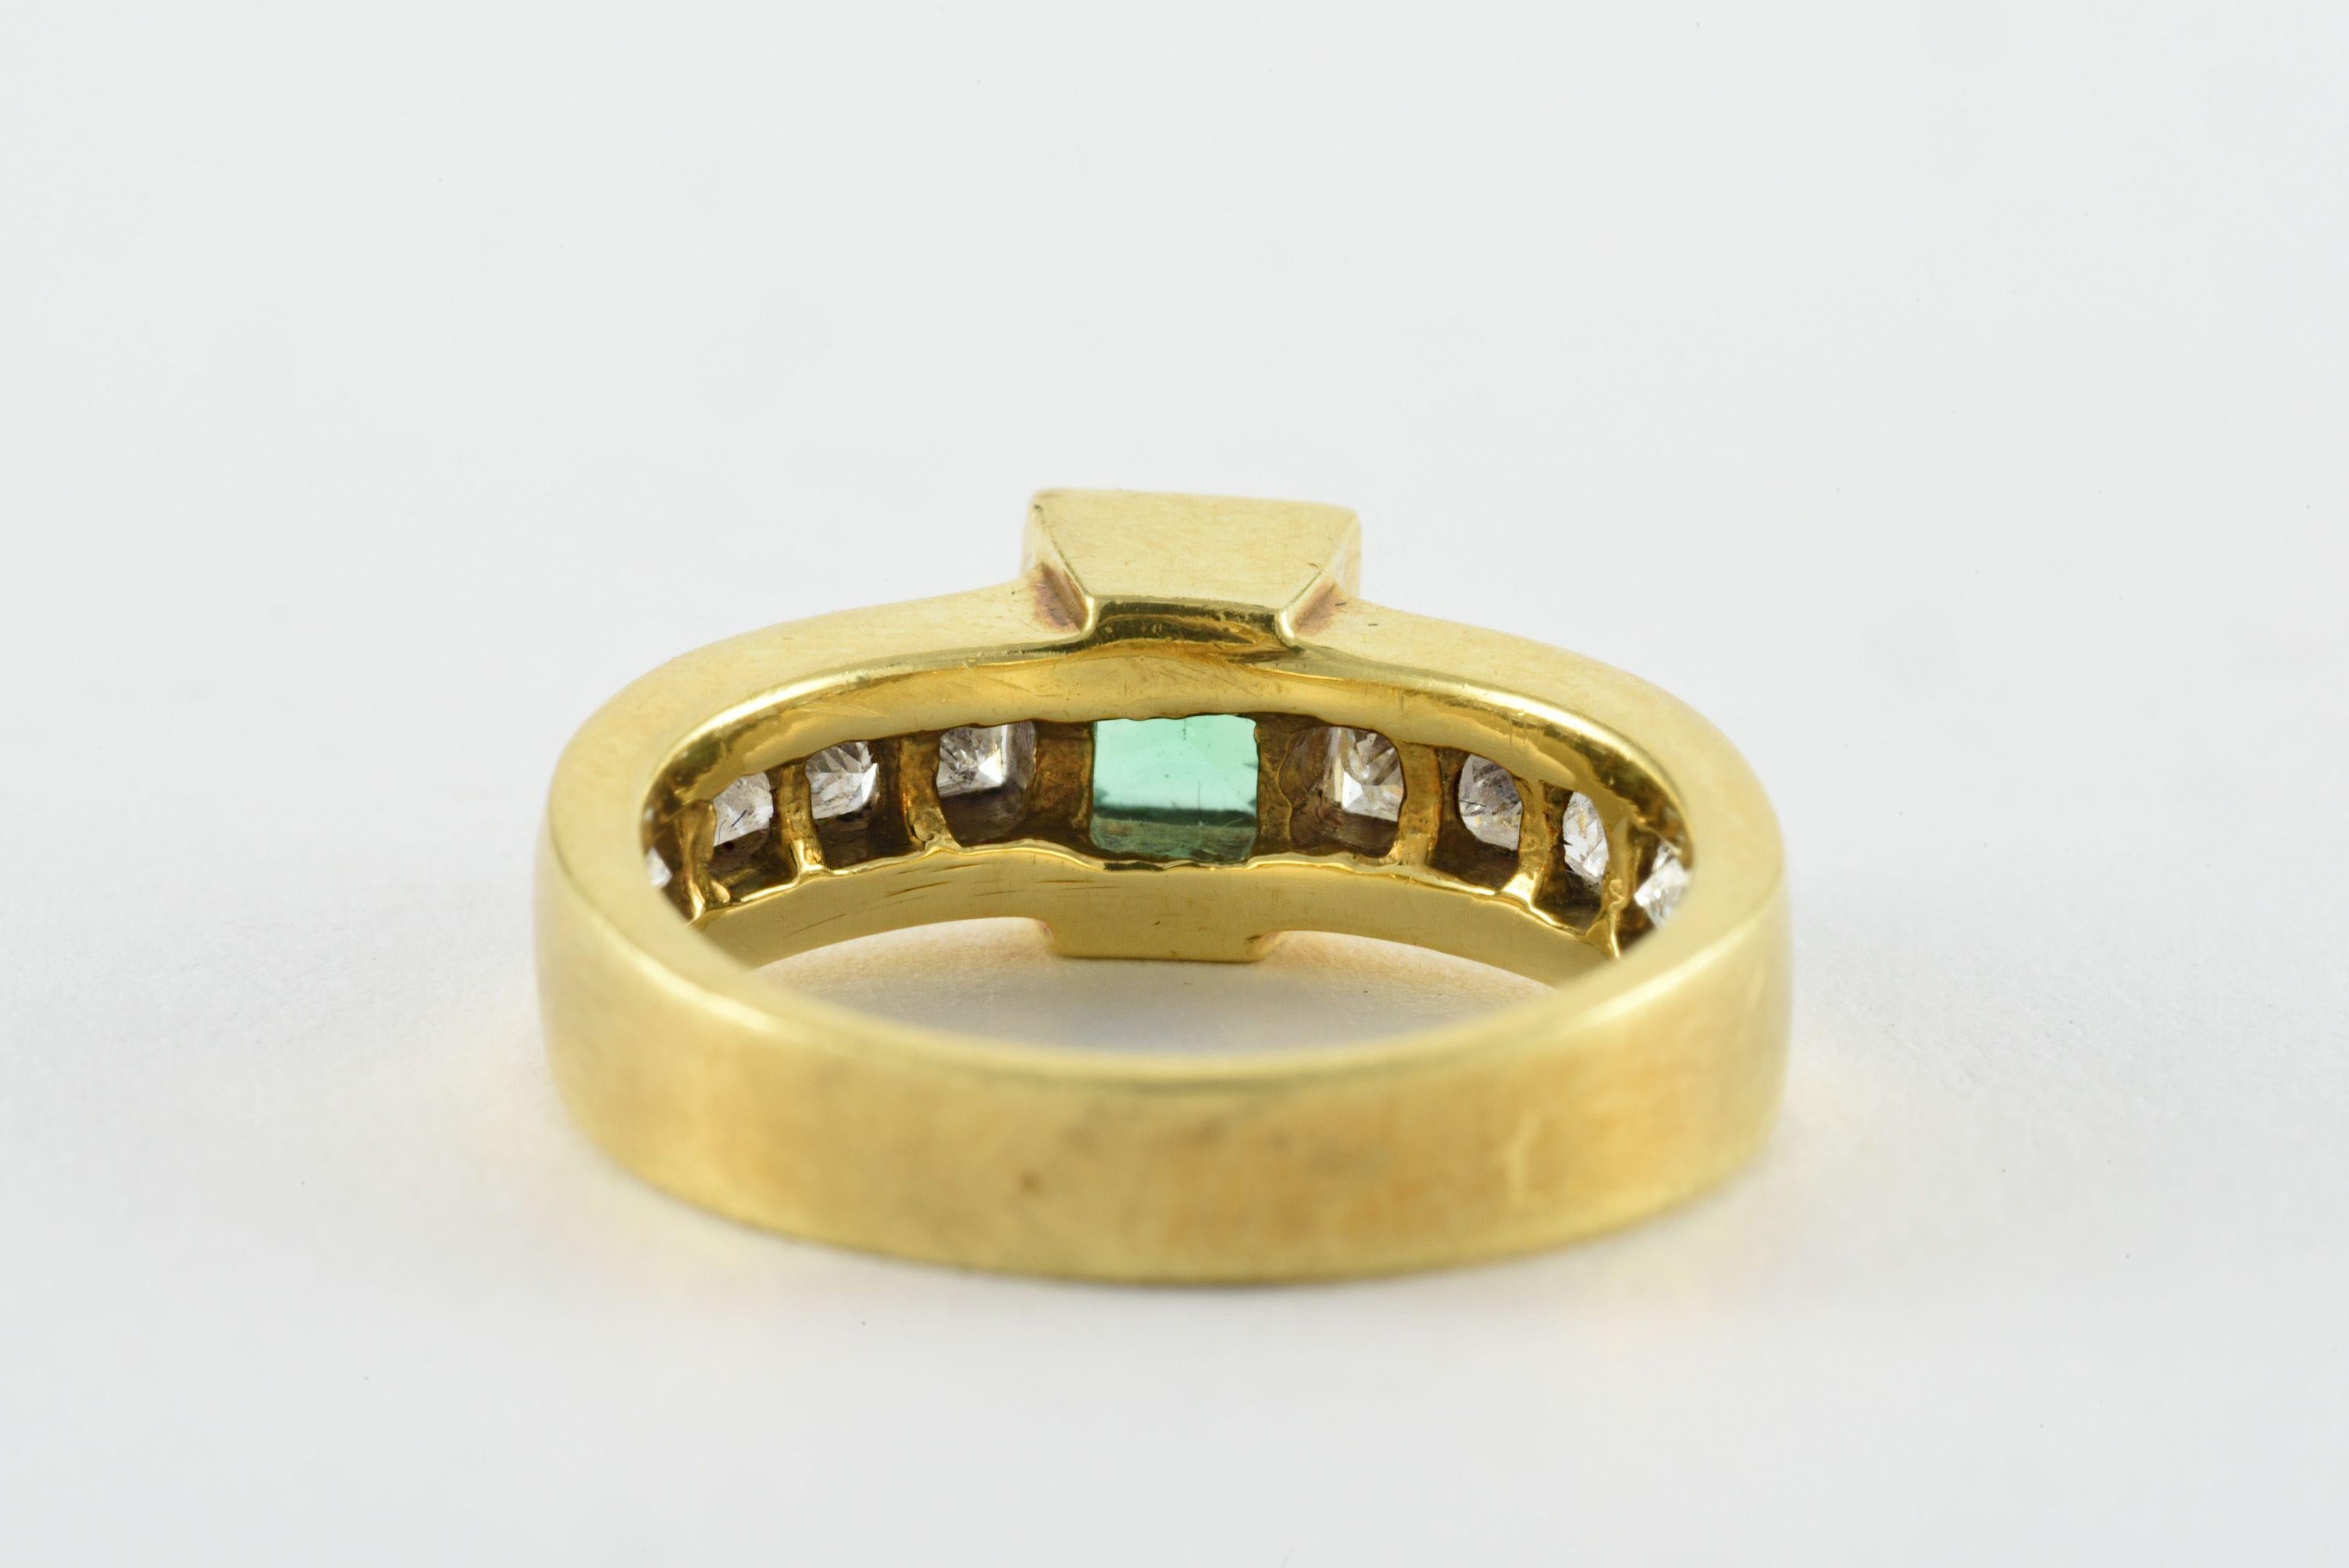 A vibrant green emerald-shaped Colombian emerald measuring approximately 0.50 carats is the centerpiece of this estate band set in a substantial 18kt yellow gold mounting, accented on the shoulders with ten princess cut diamonds, in a channel